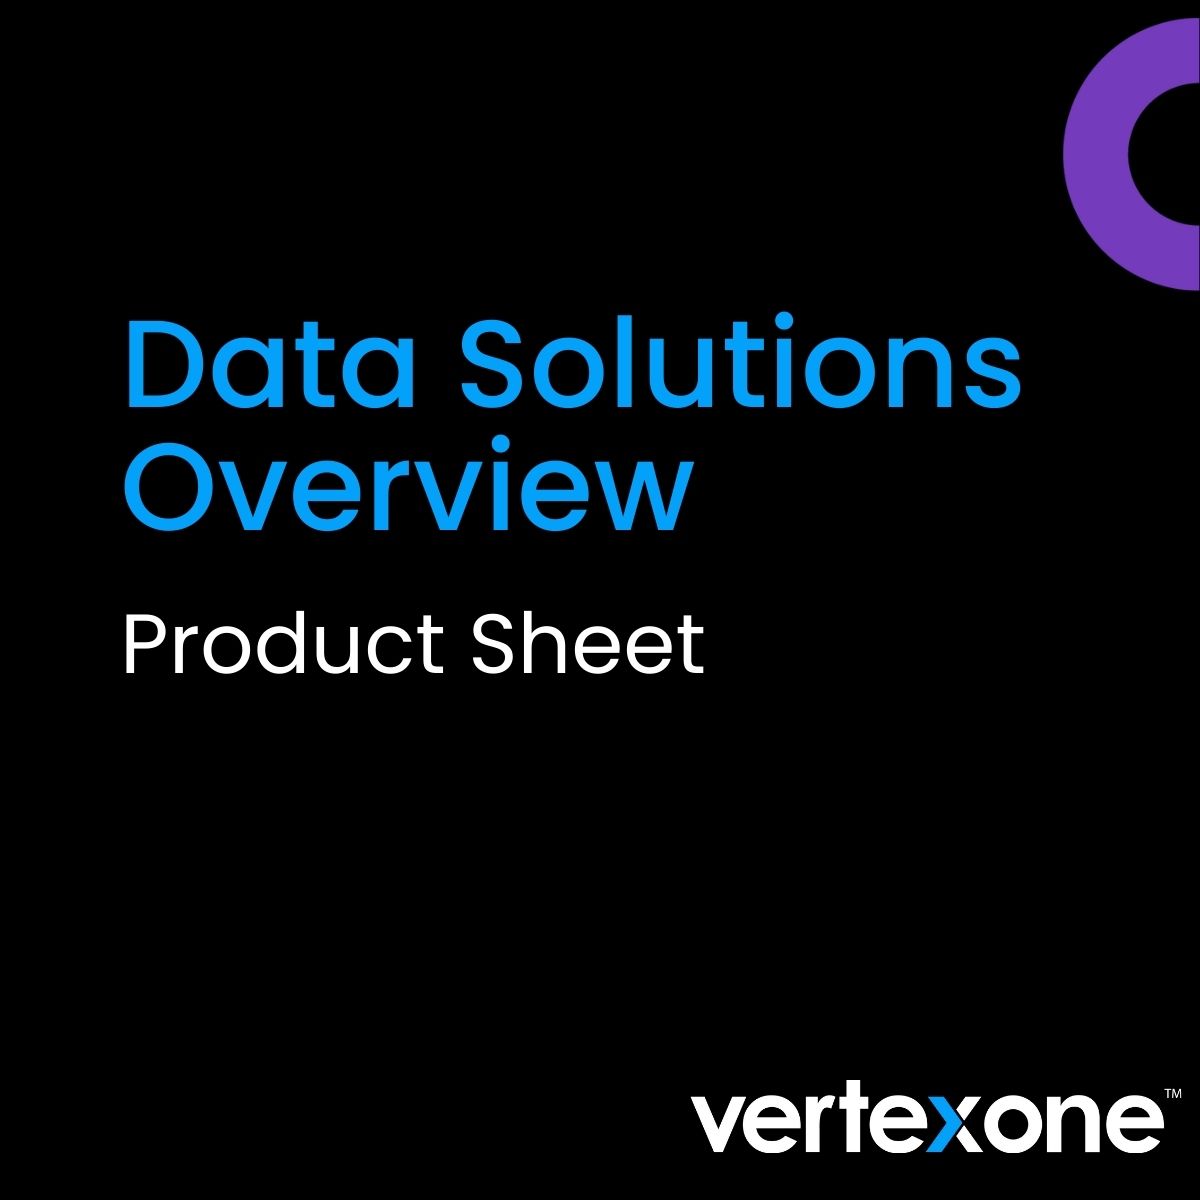 Data Solutions Overview Product Sheet